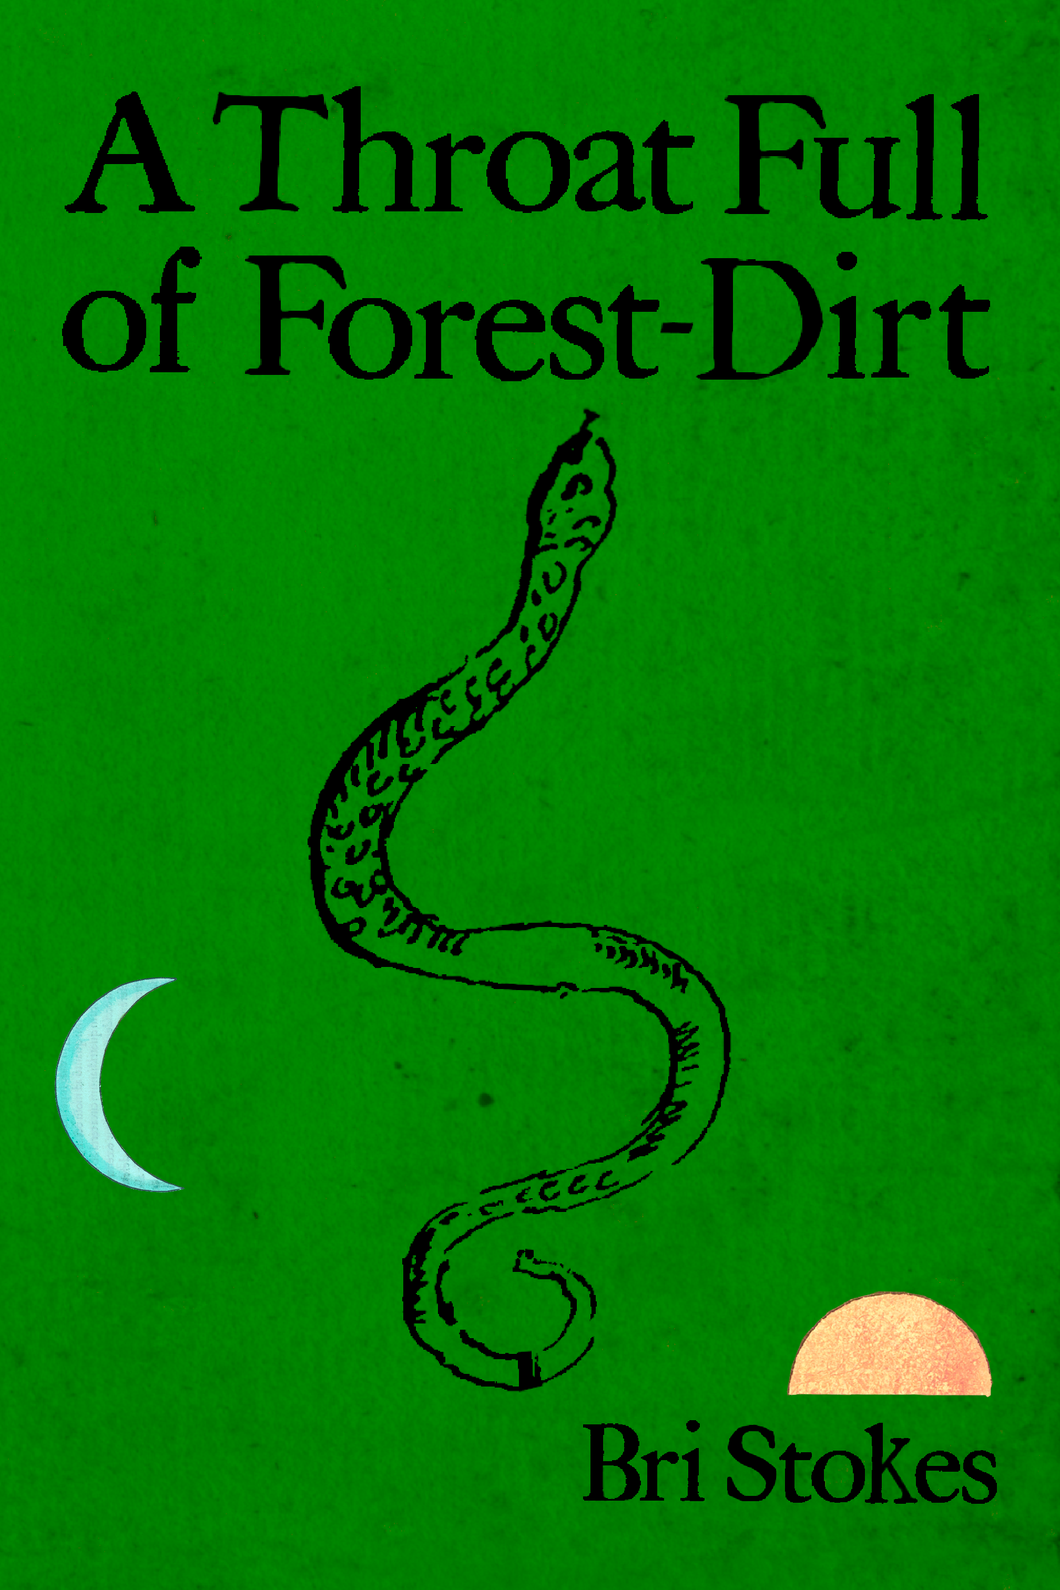 A Throat Full of Forest-Dirt, by Bri Stokes-Print Books-Bottlecap Press